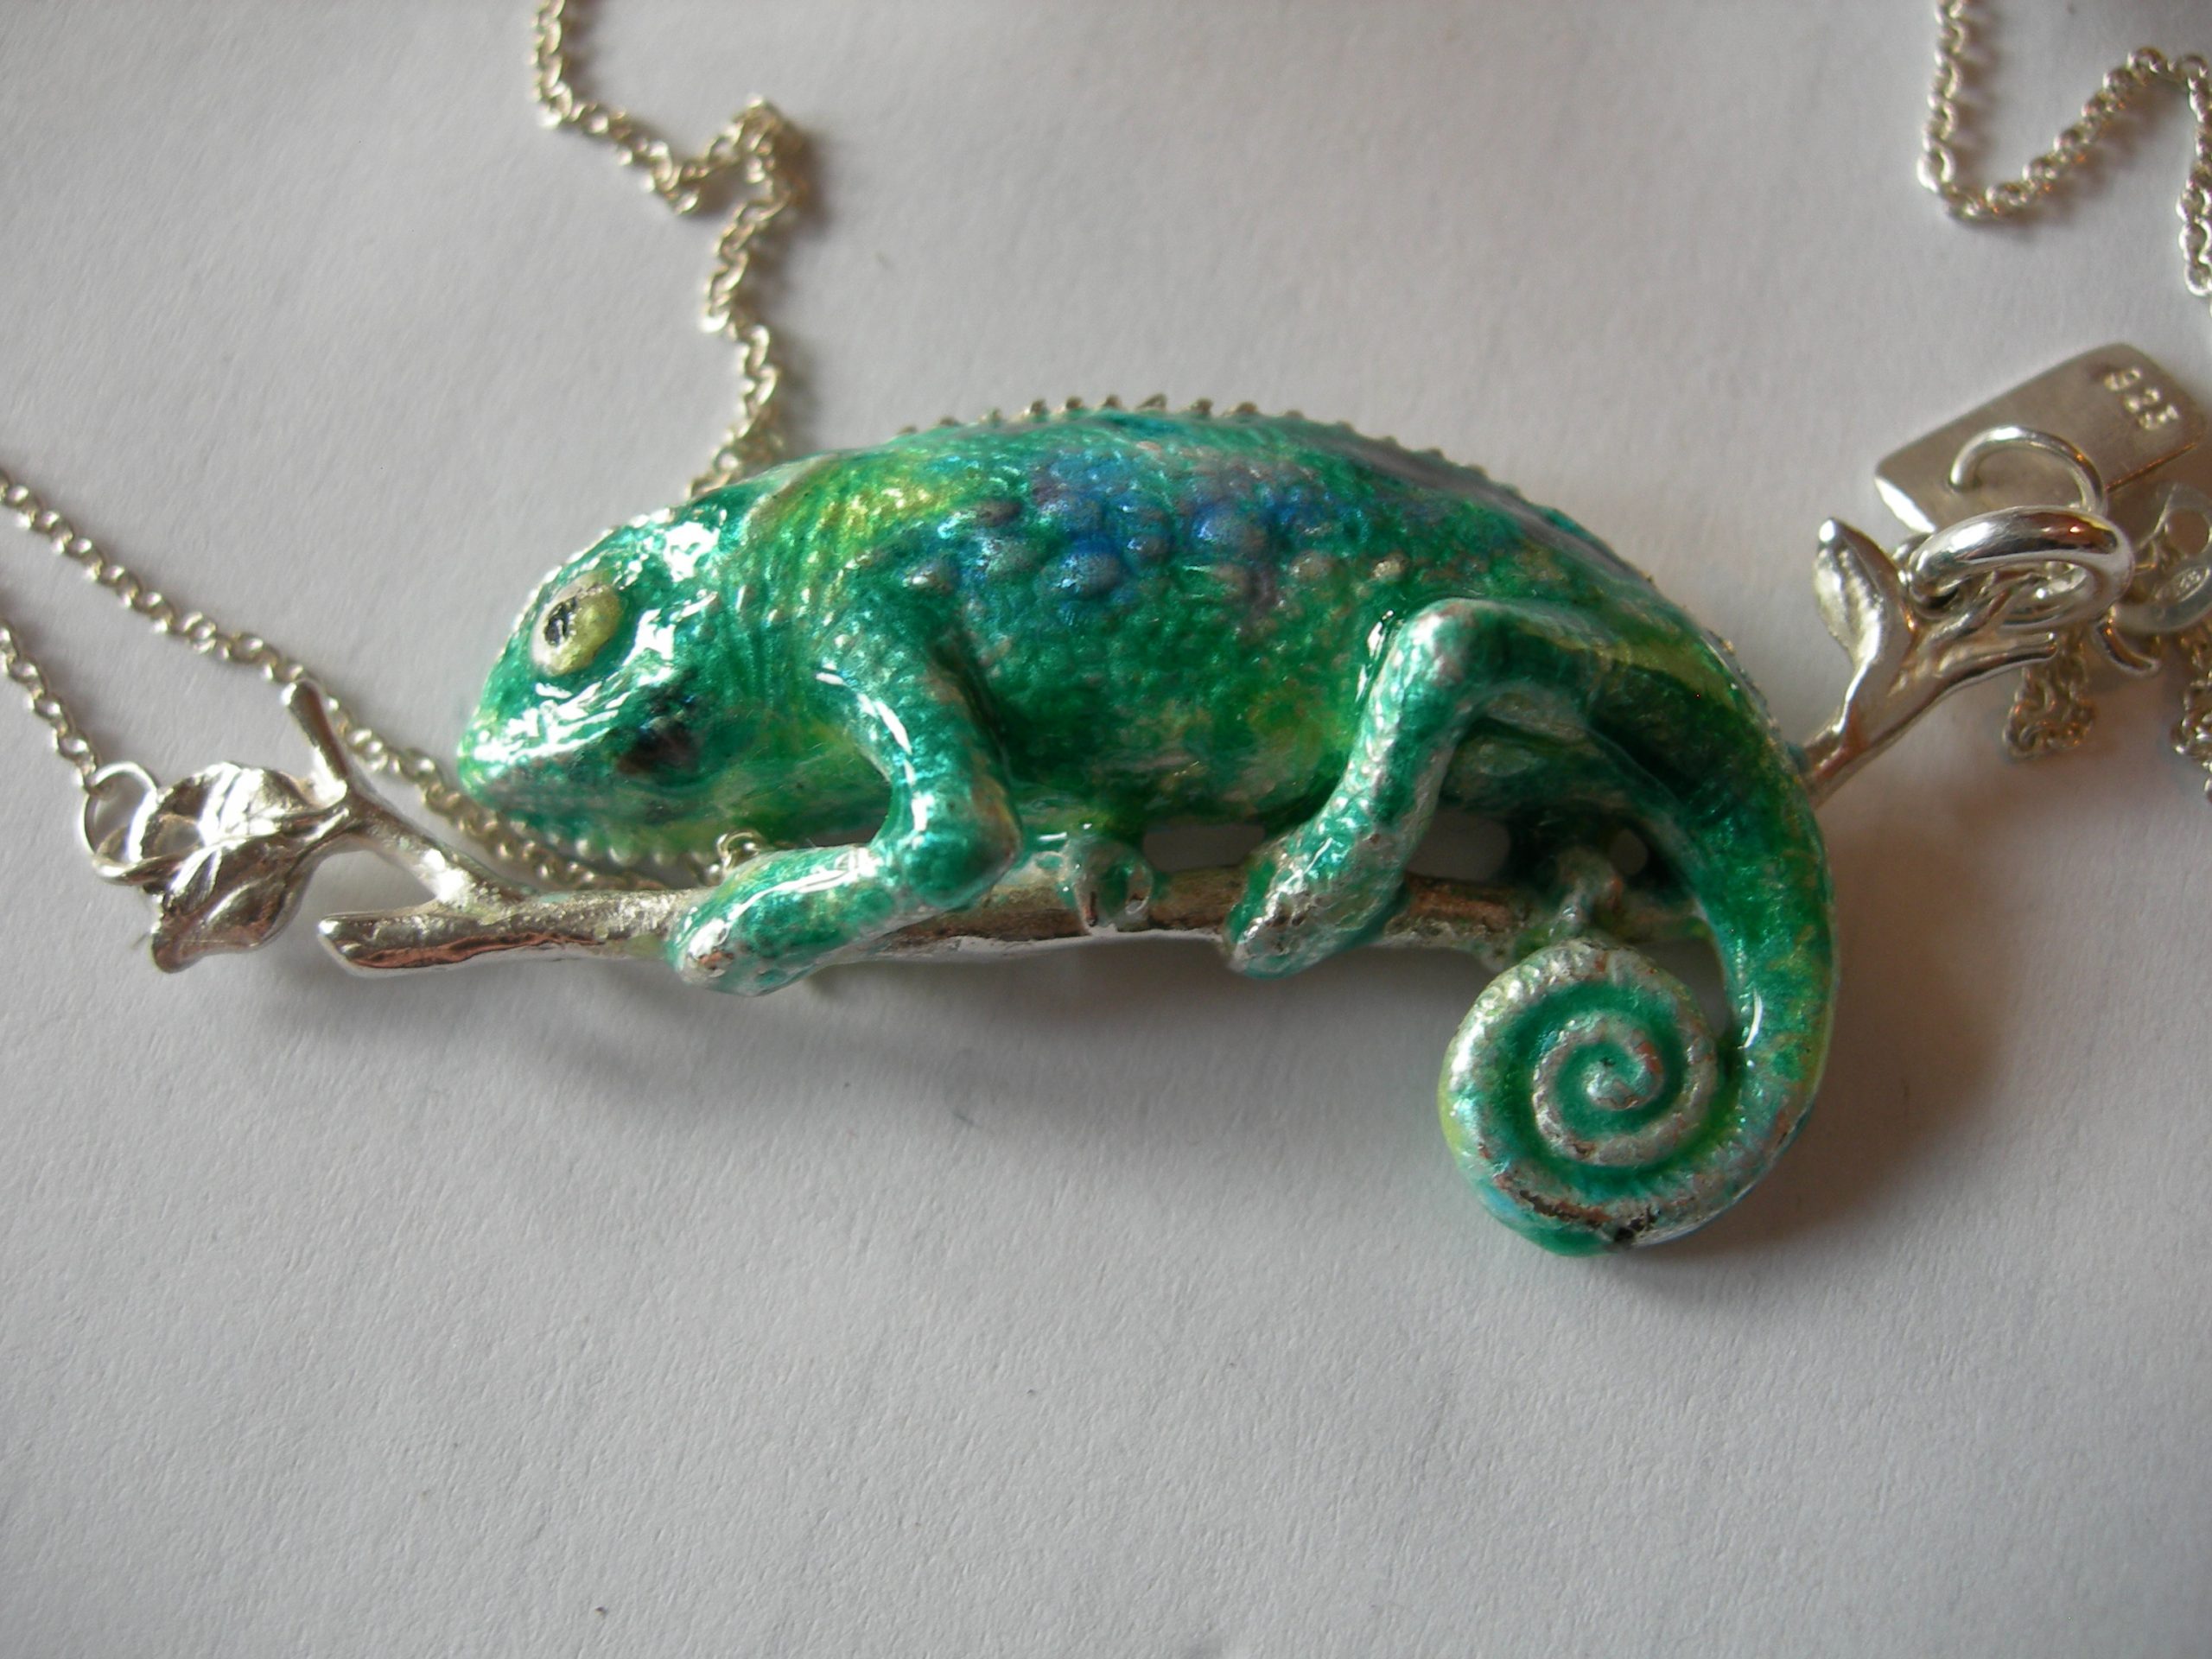 Chameleon pendant in plated silver